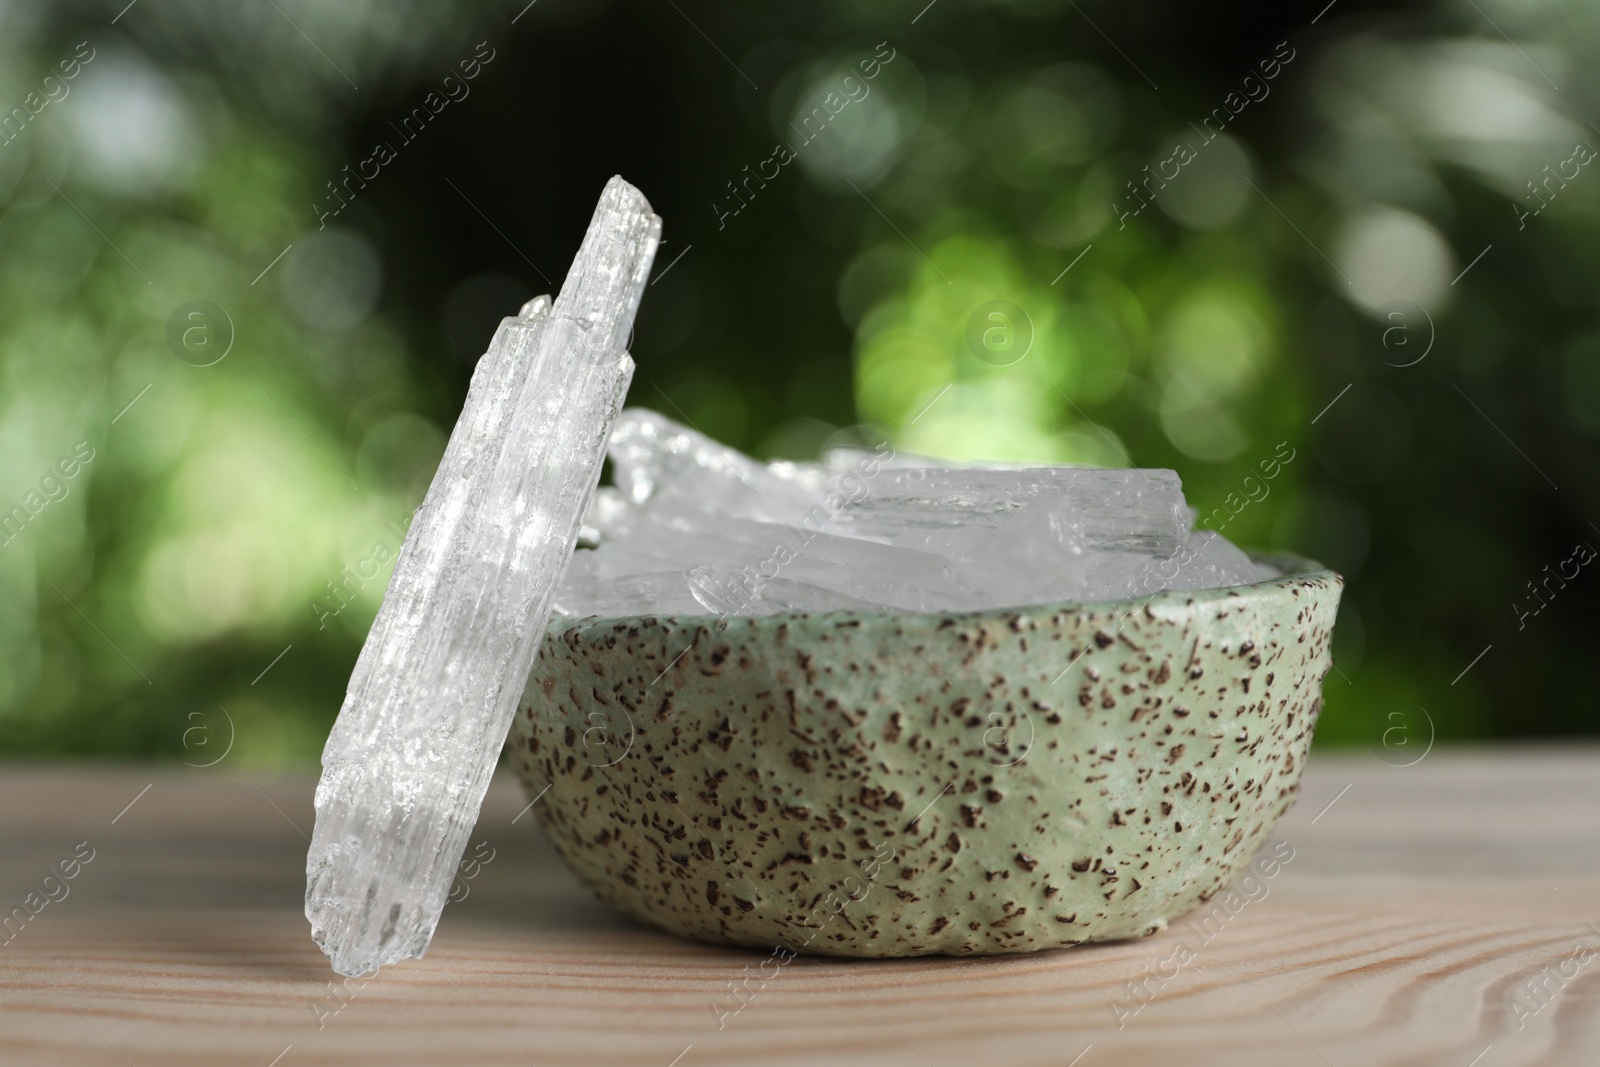 Photo of Menthol crystals on wooden table against blurred background